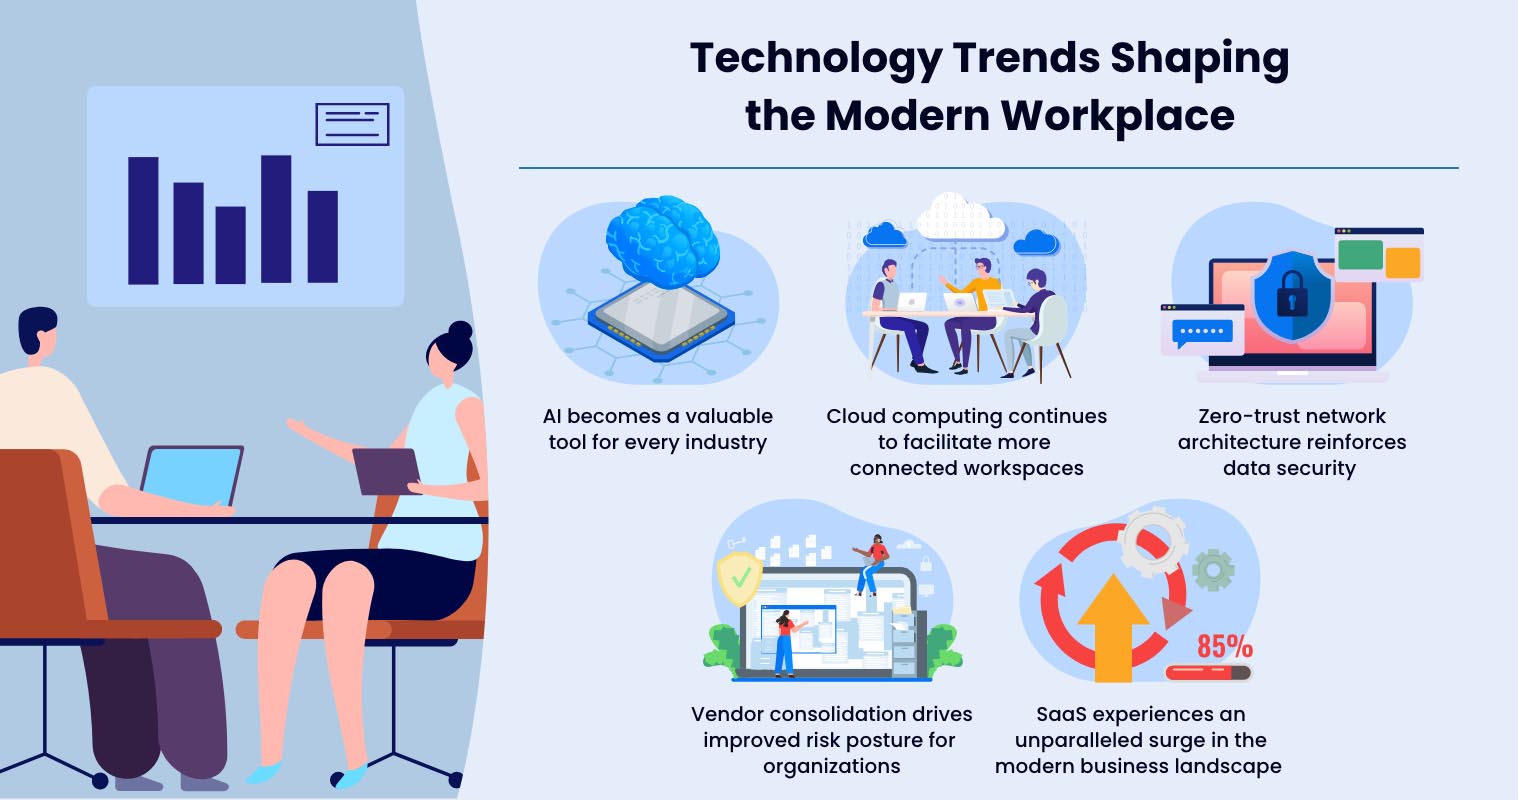 Infographic on Technology Trends Shaping the Modern Workplace